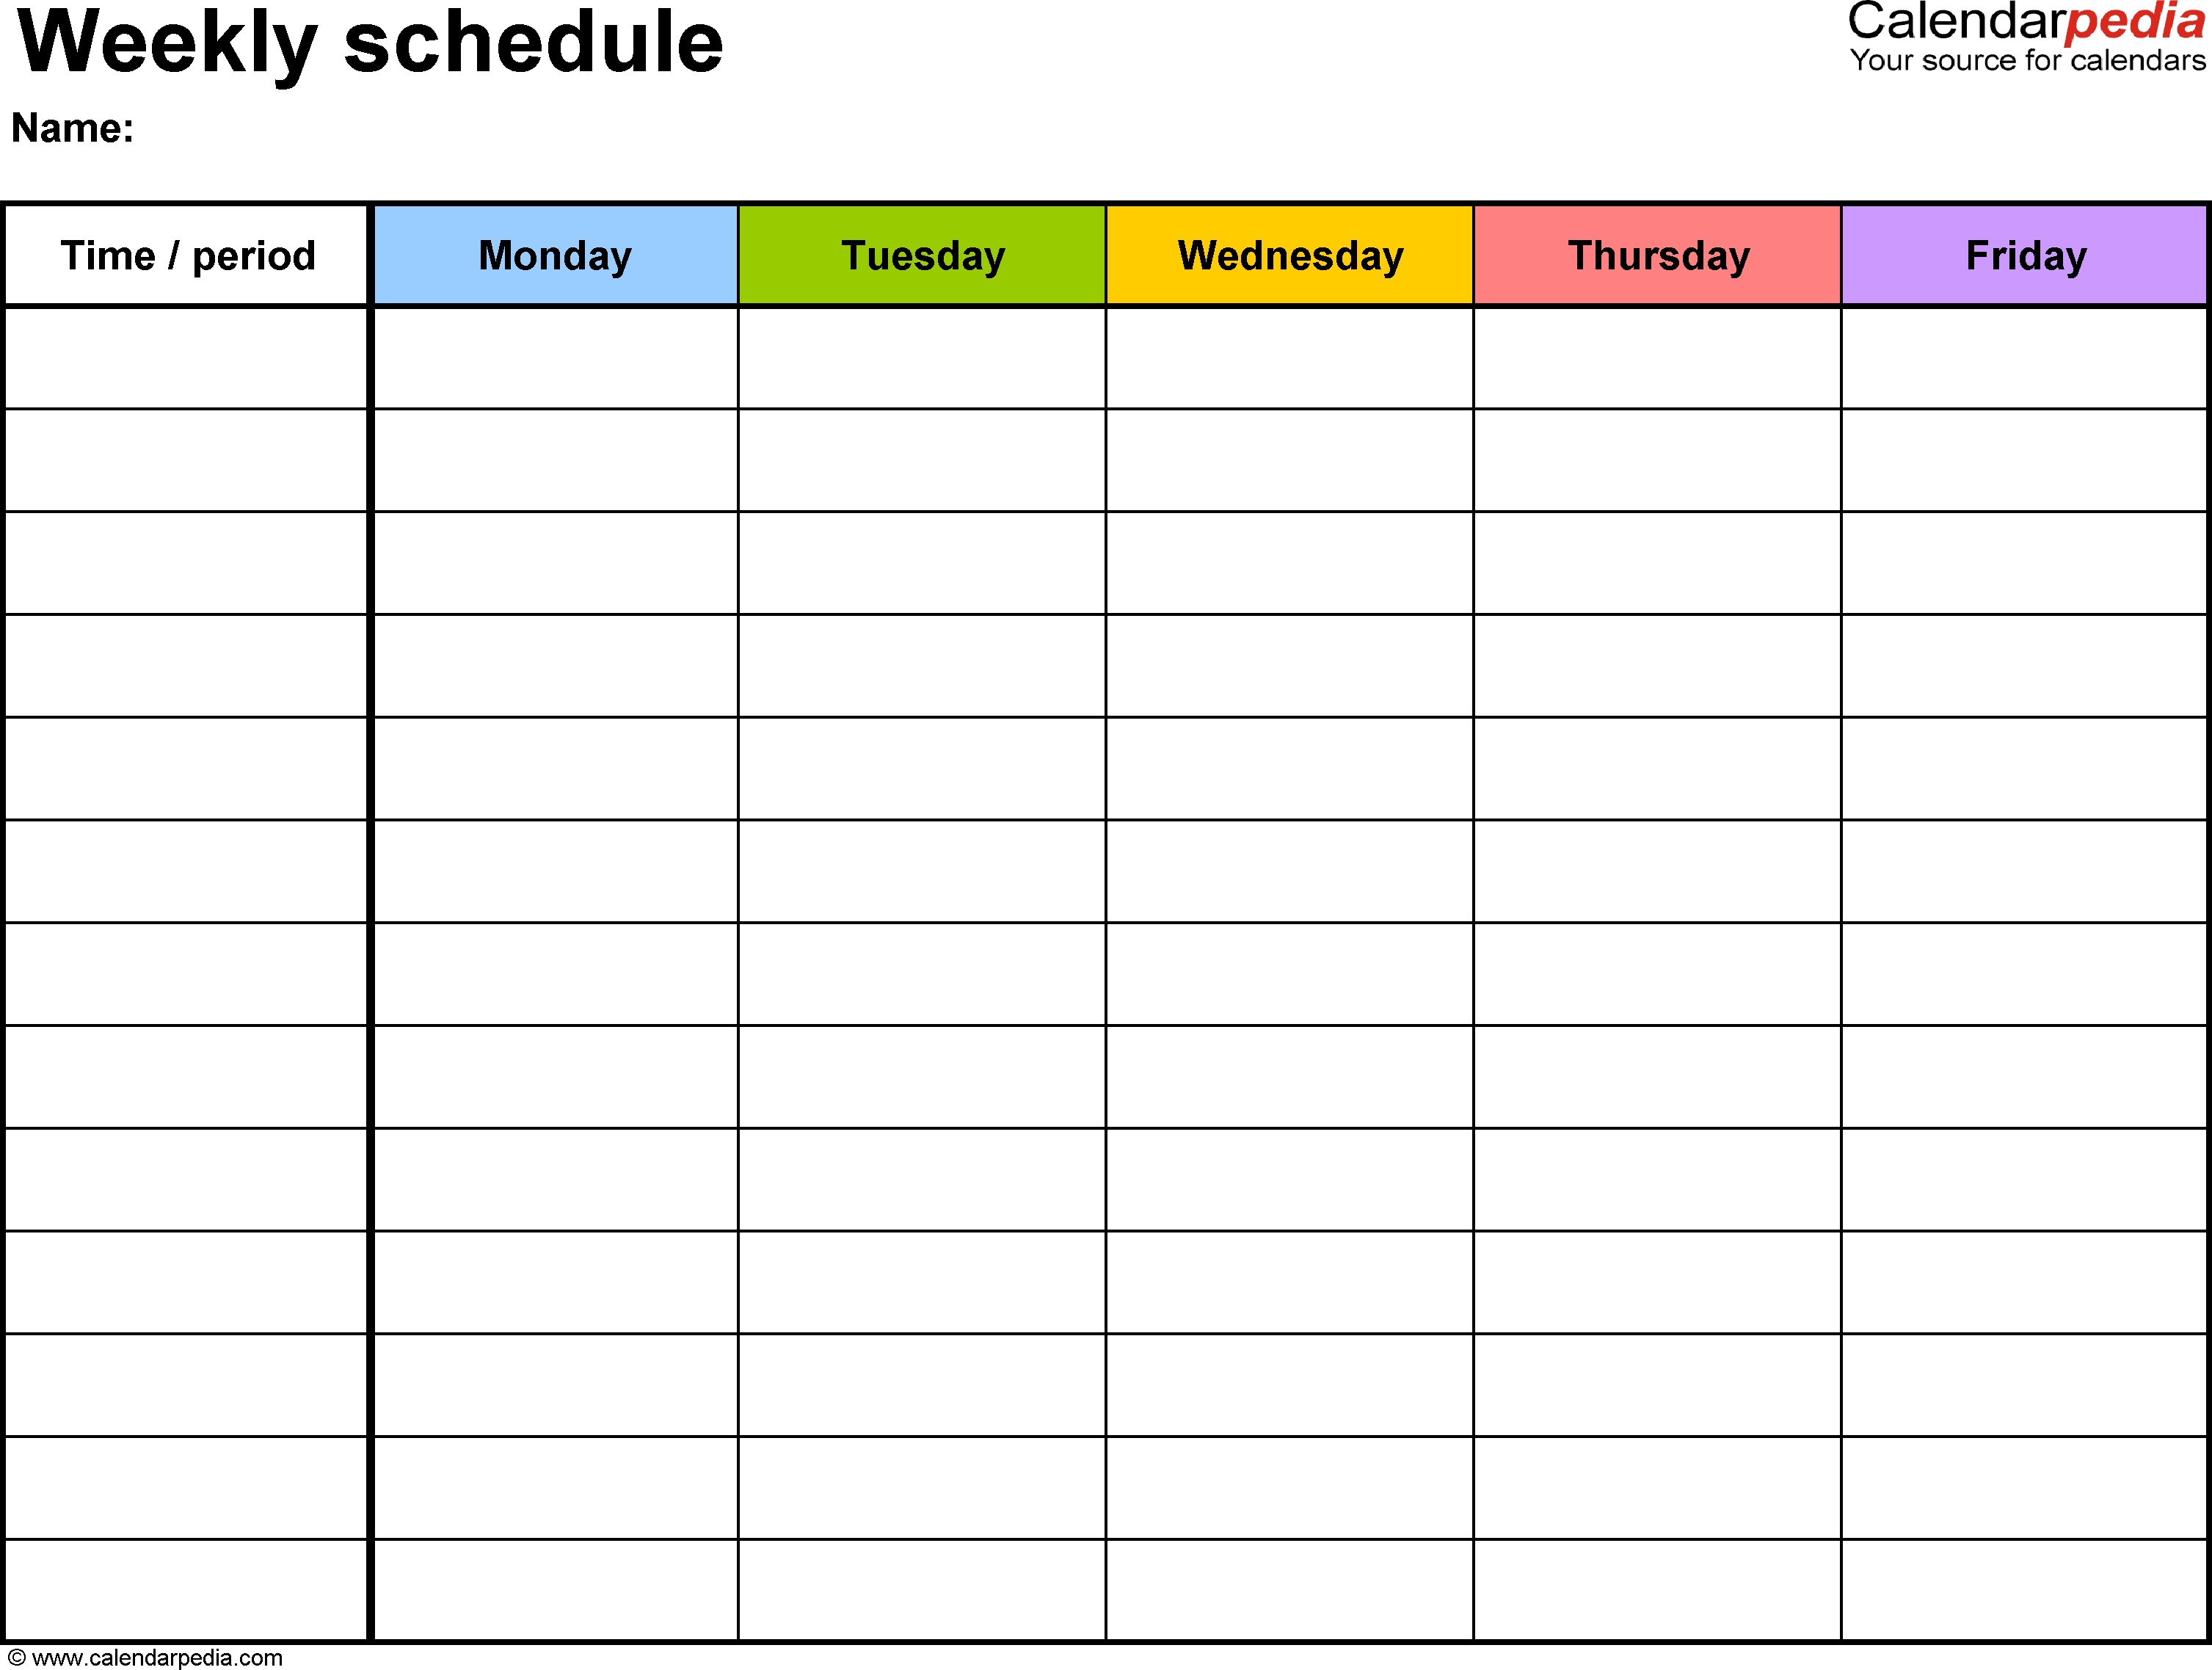 Free Weekly Schedule Templates For Pdf - 18 Templates Monthly Calendar Without Dates